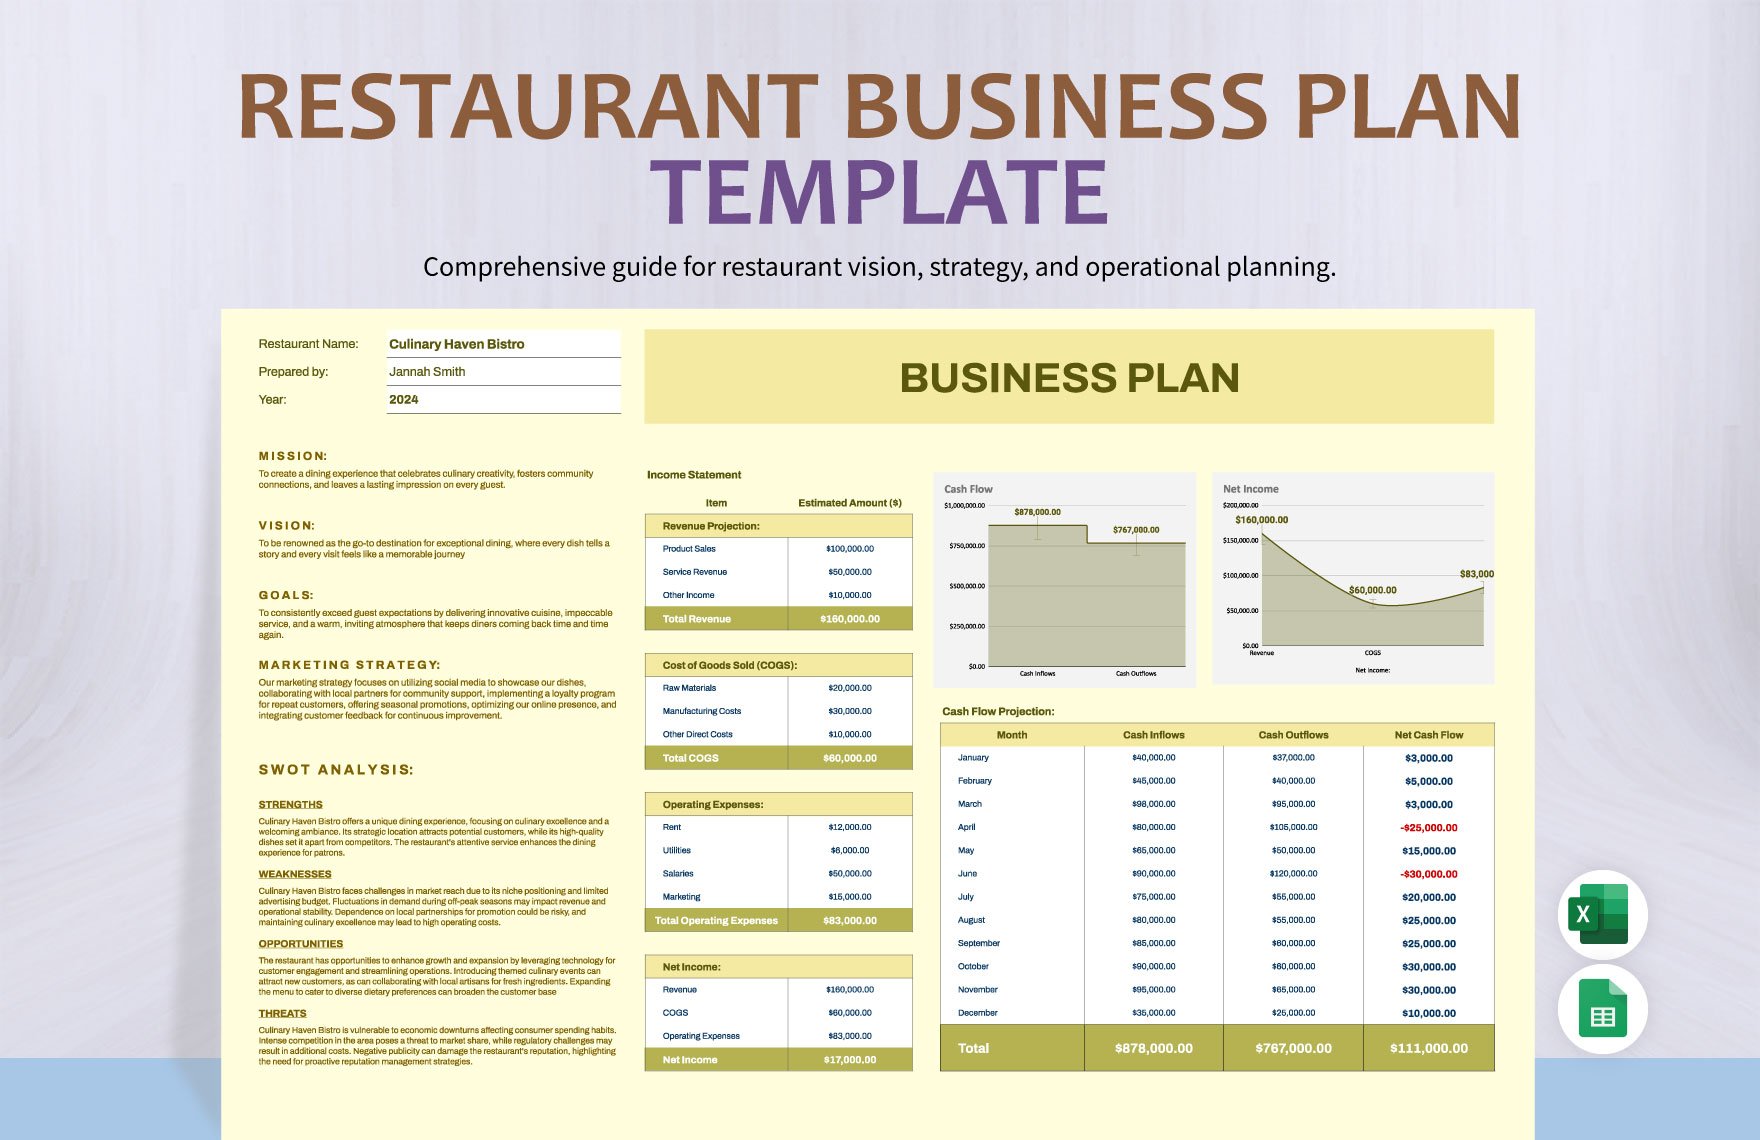 Restaurant Business Plan Template in Excel, Google Sheets